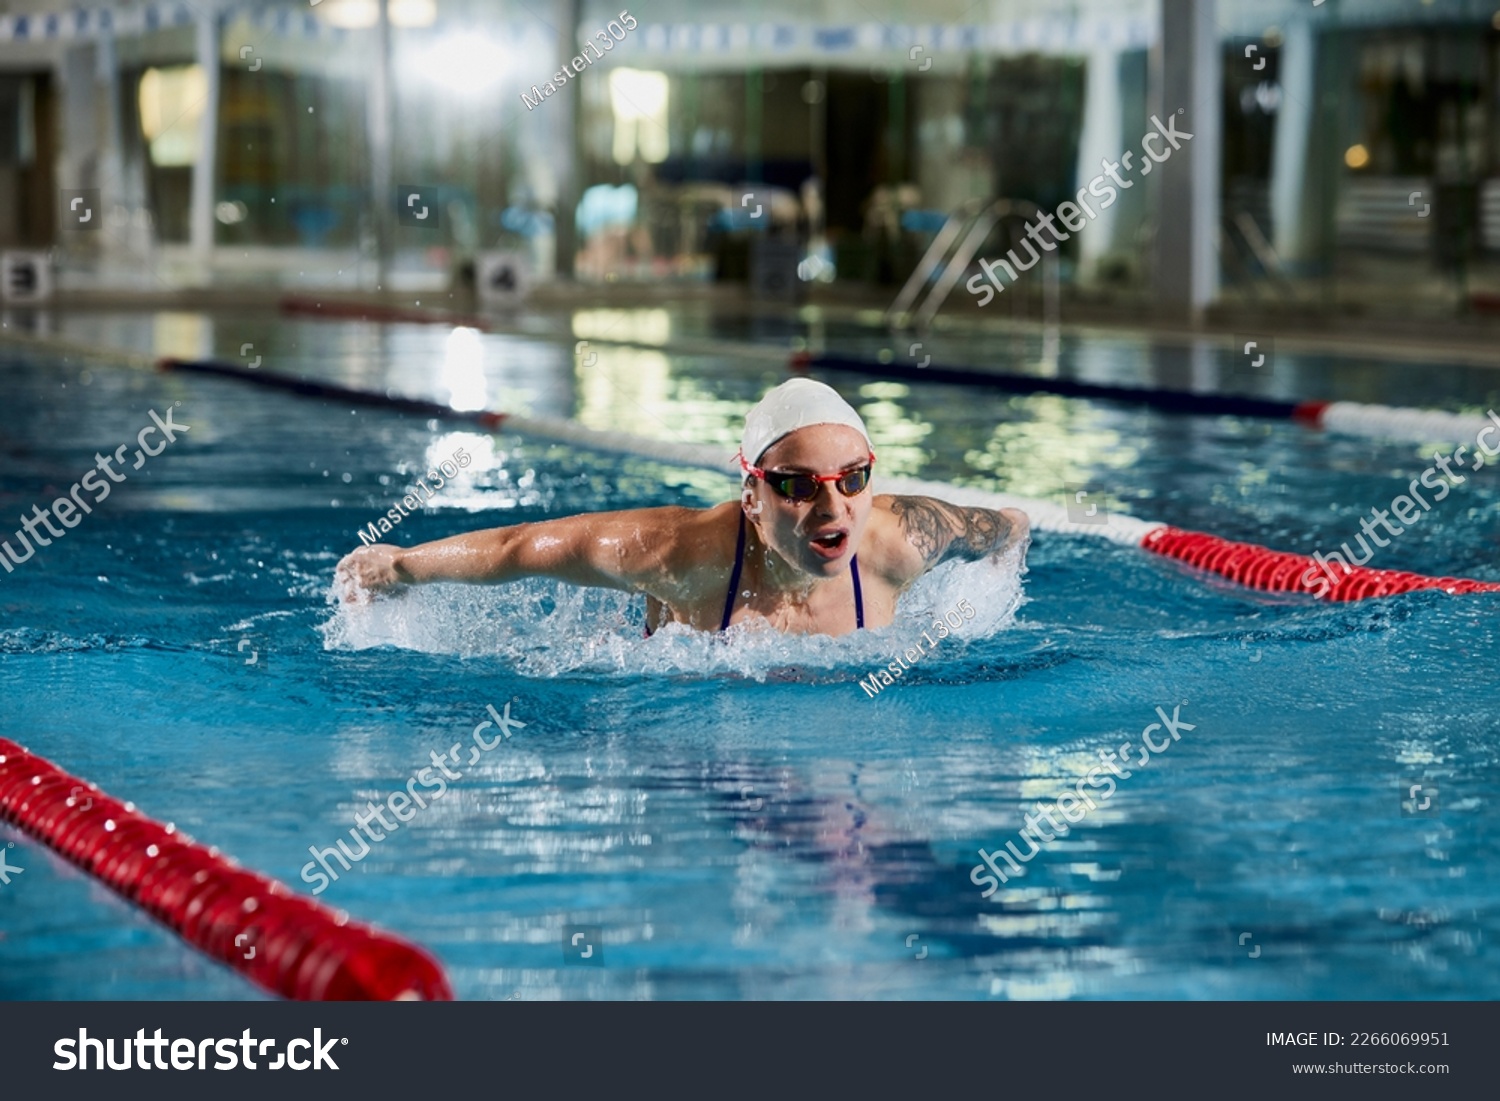 Butterfly swimming type. Young woman, professional female swimming athlete in cap and goggles training in pool indoors. Concept of sport, endurance, competition, energy, healthy lifestyle #2266069951